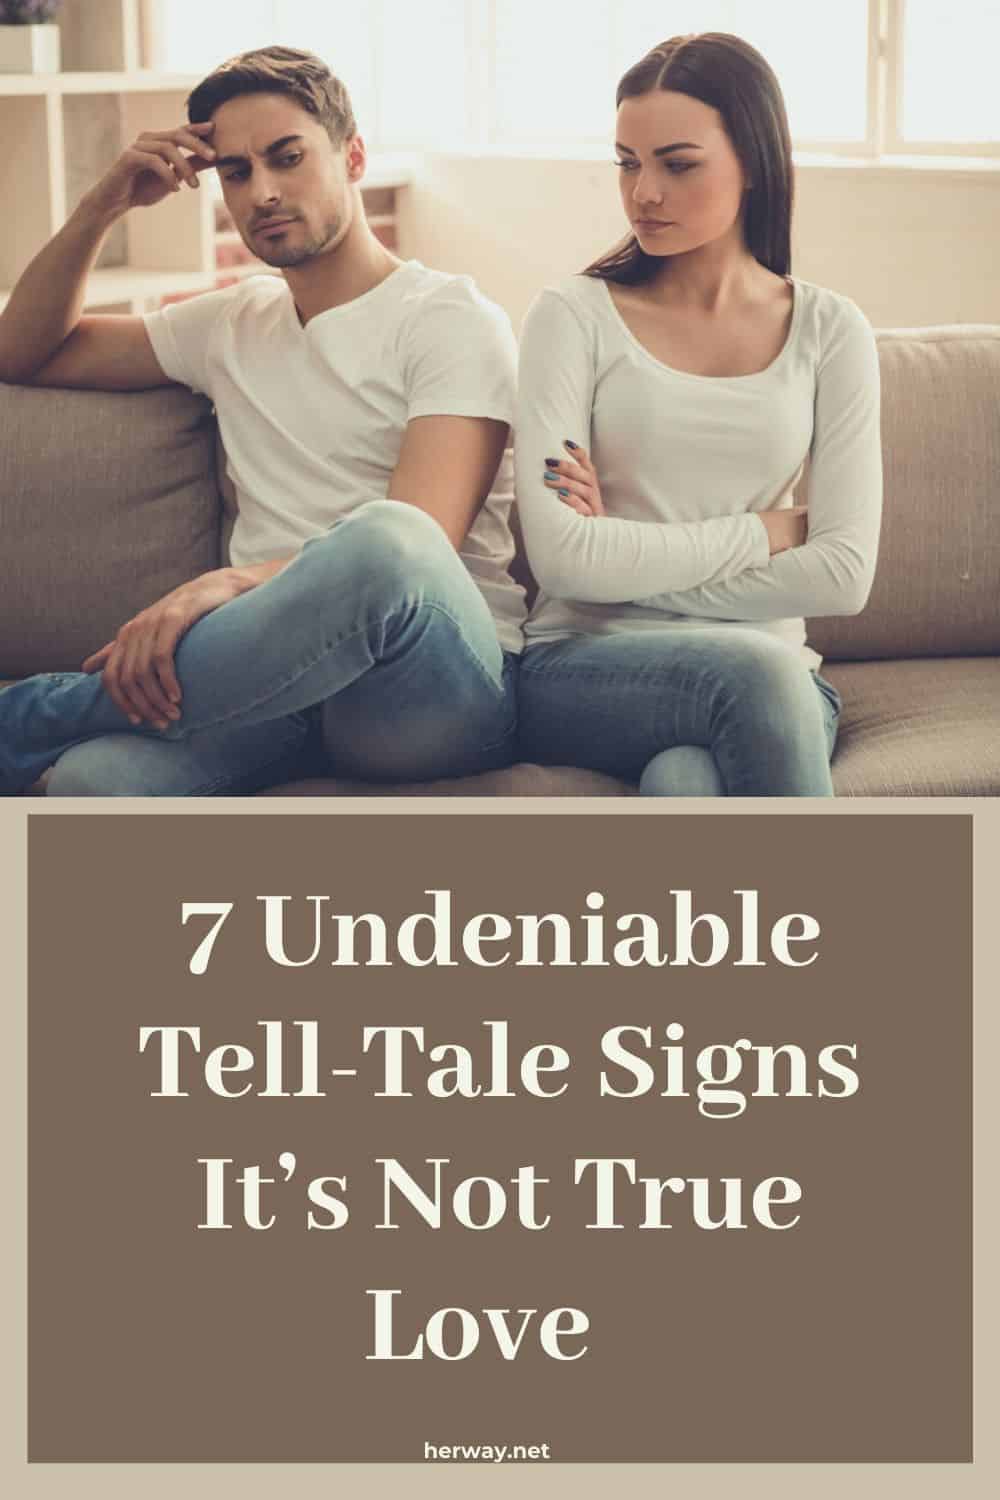 7 Undeniable Tell-Tale Signs It’s Not True Love 